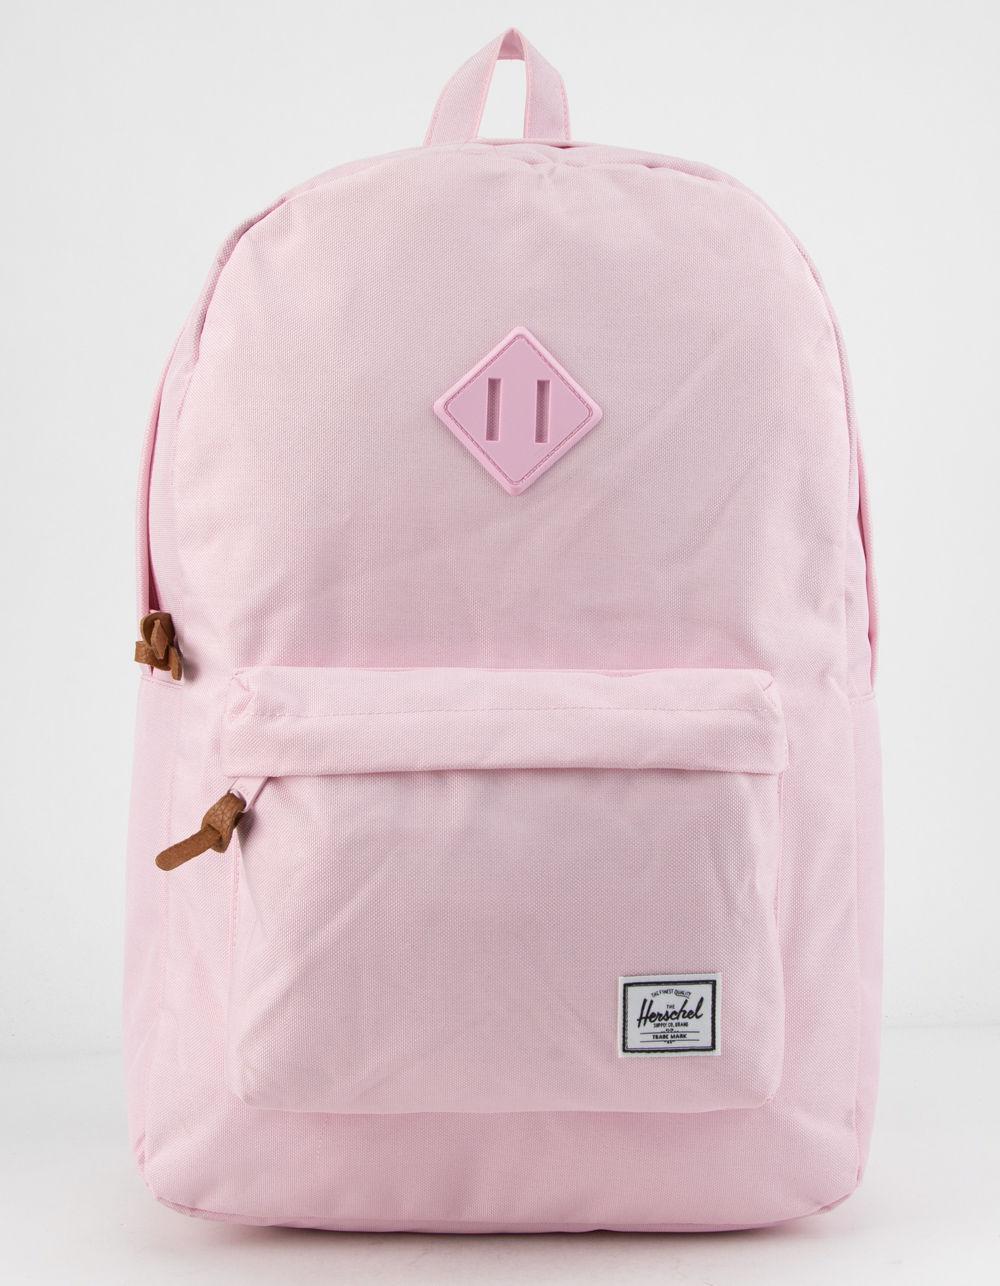 Lyst - Herschel Supply Co. . Heritage Pink Lady Crosshatch Backpack in Pink